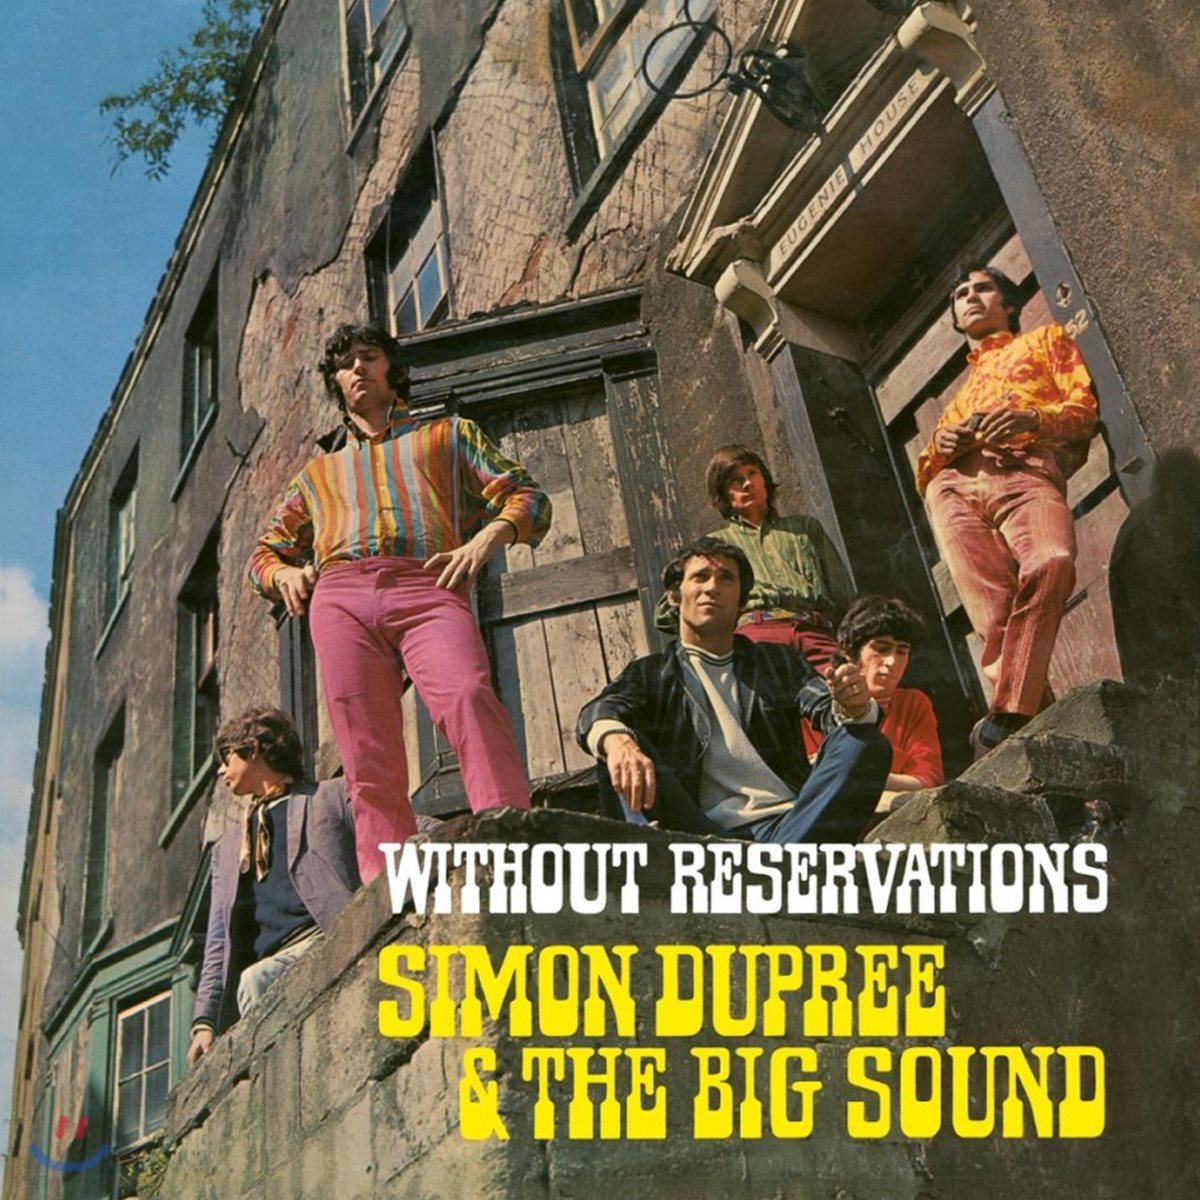 Simon Dupree &amp; The Big Sound (사이먼 듀프리 앤 더 빅 사운드) - Without Reservations [LP]